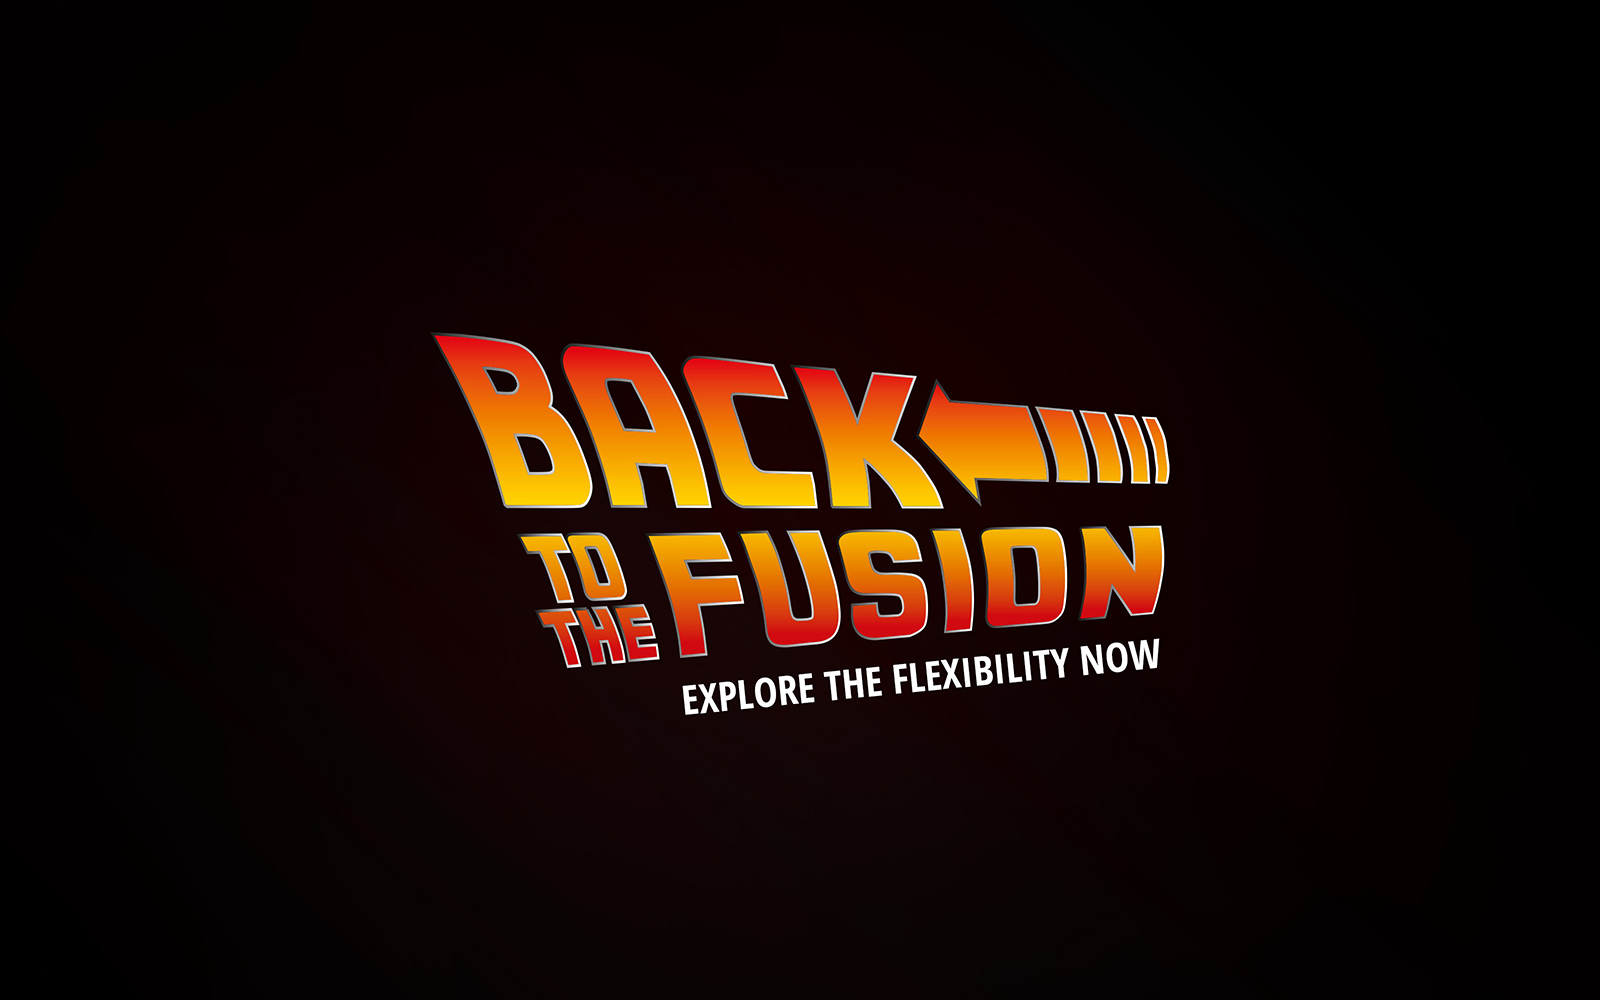 Back to the Fusion